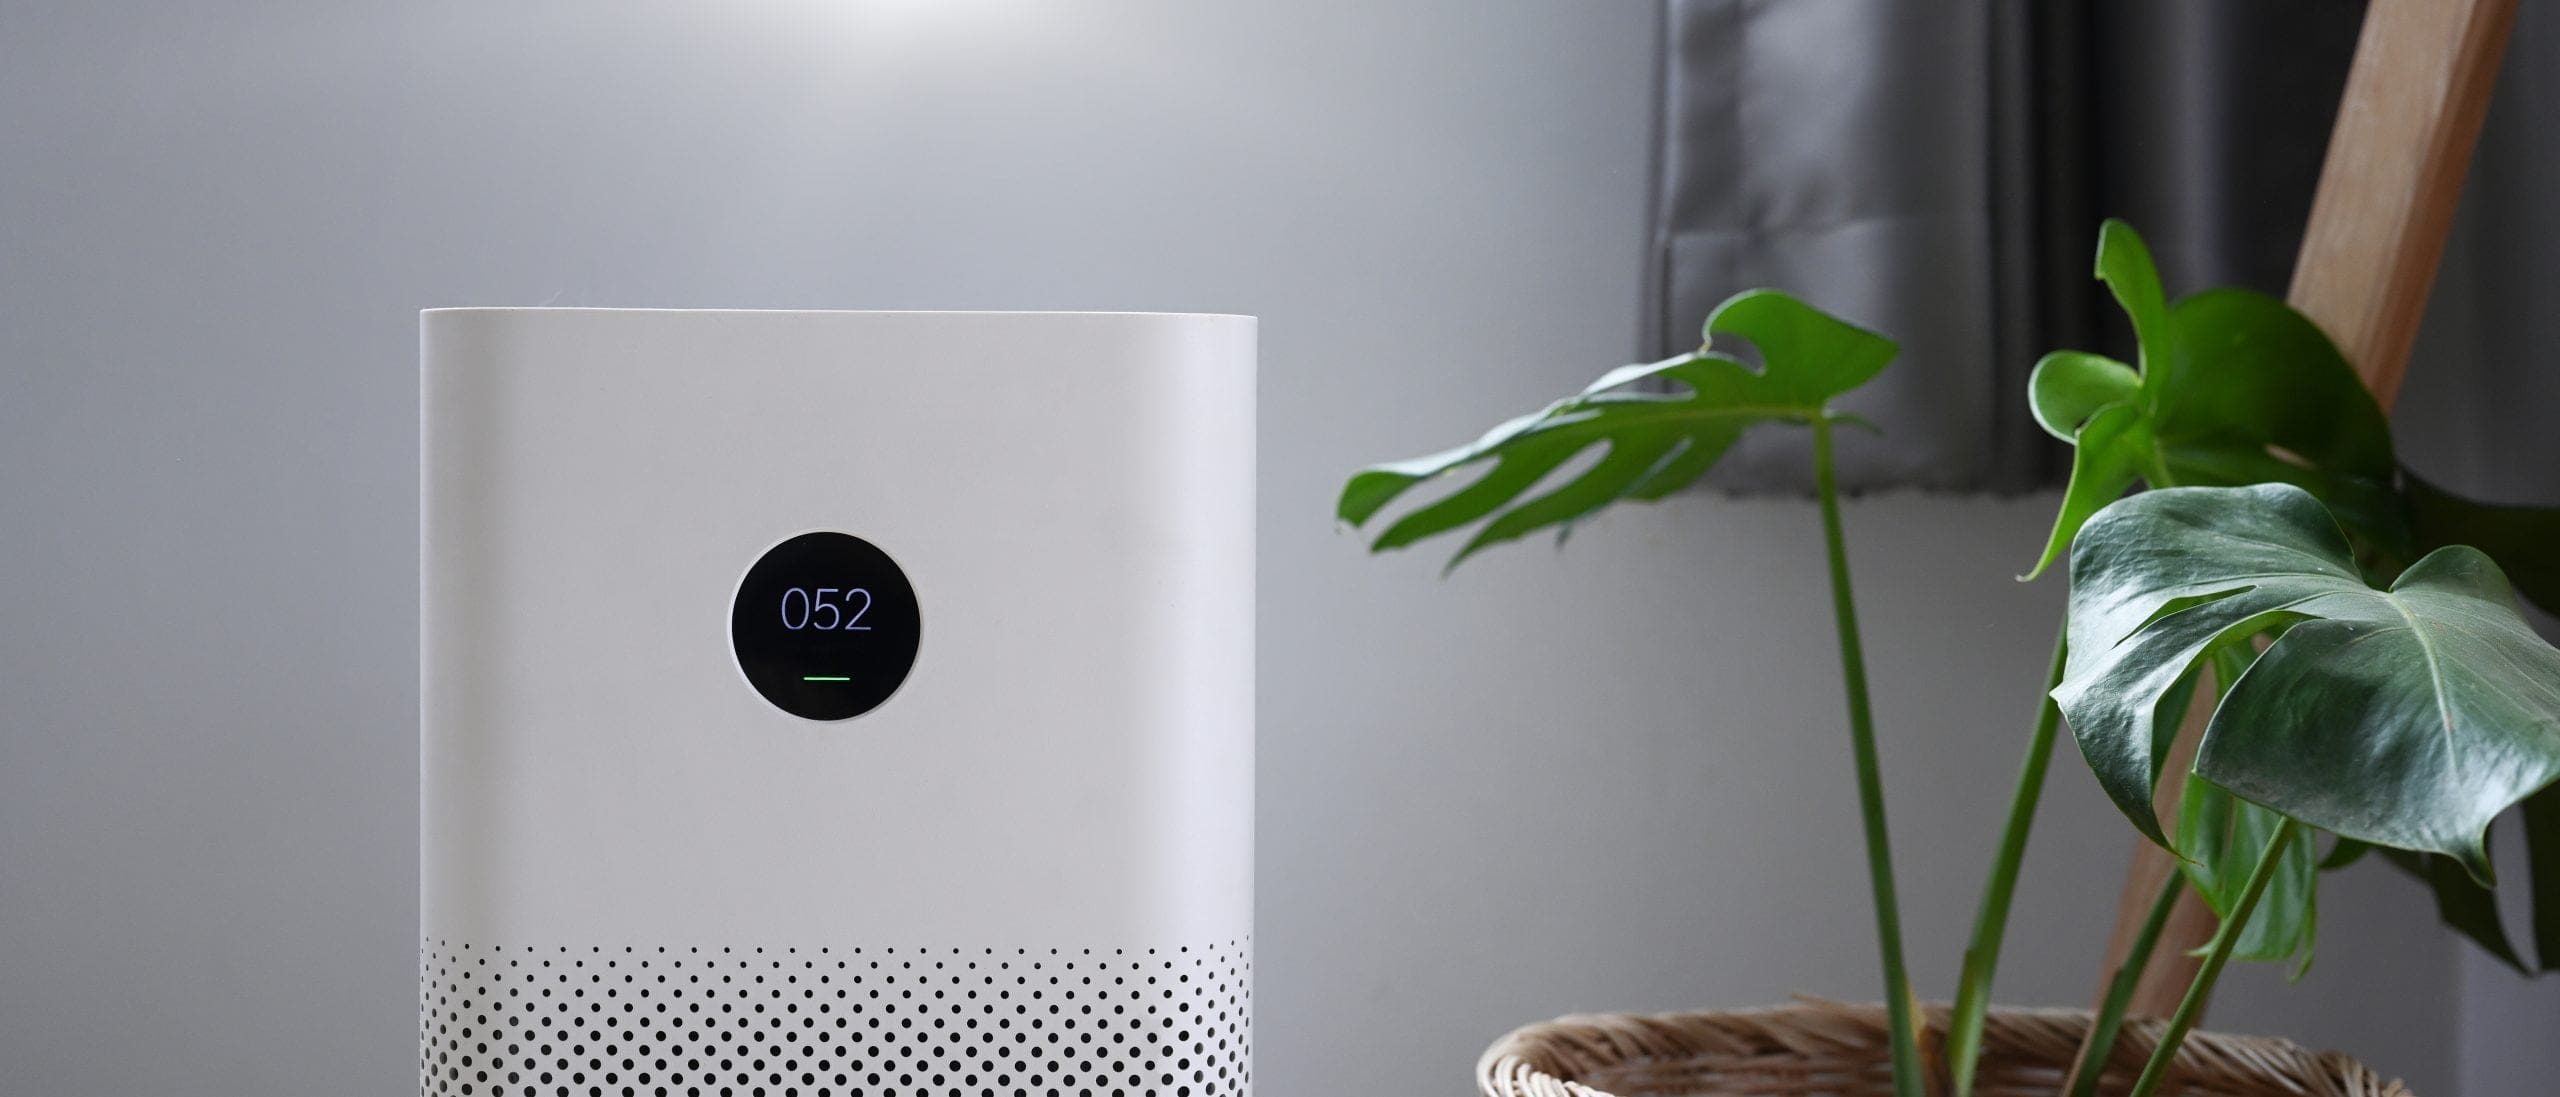 air-purifier-with-digital-monitor-screen-bedroom-show-air-quality-air-pollution-levels